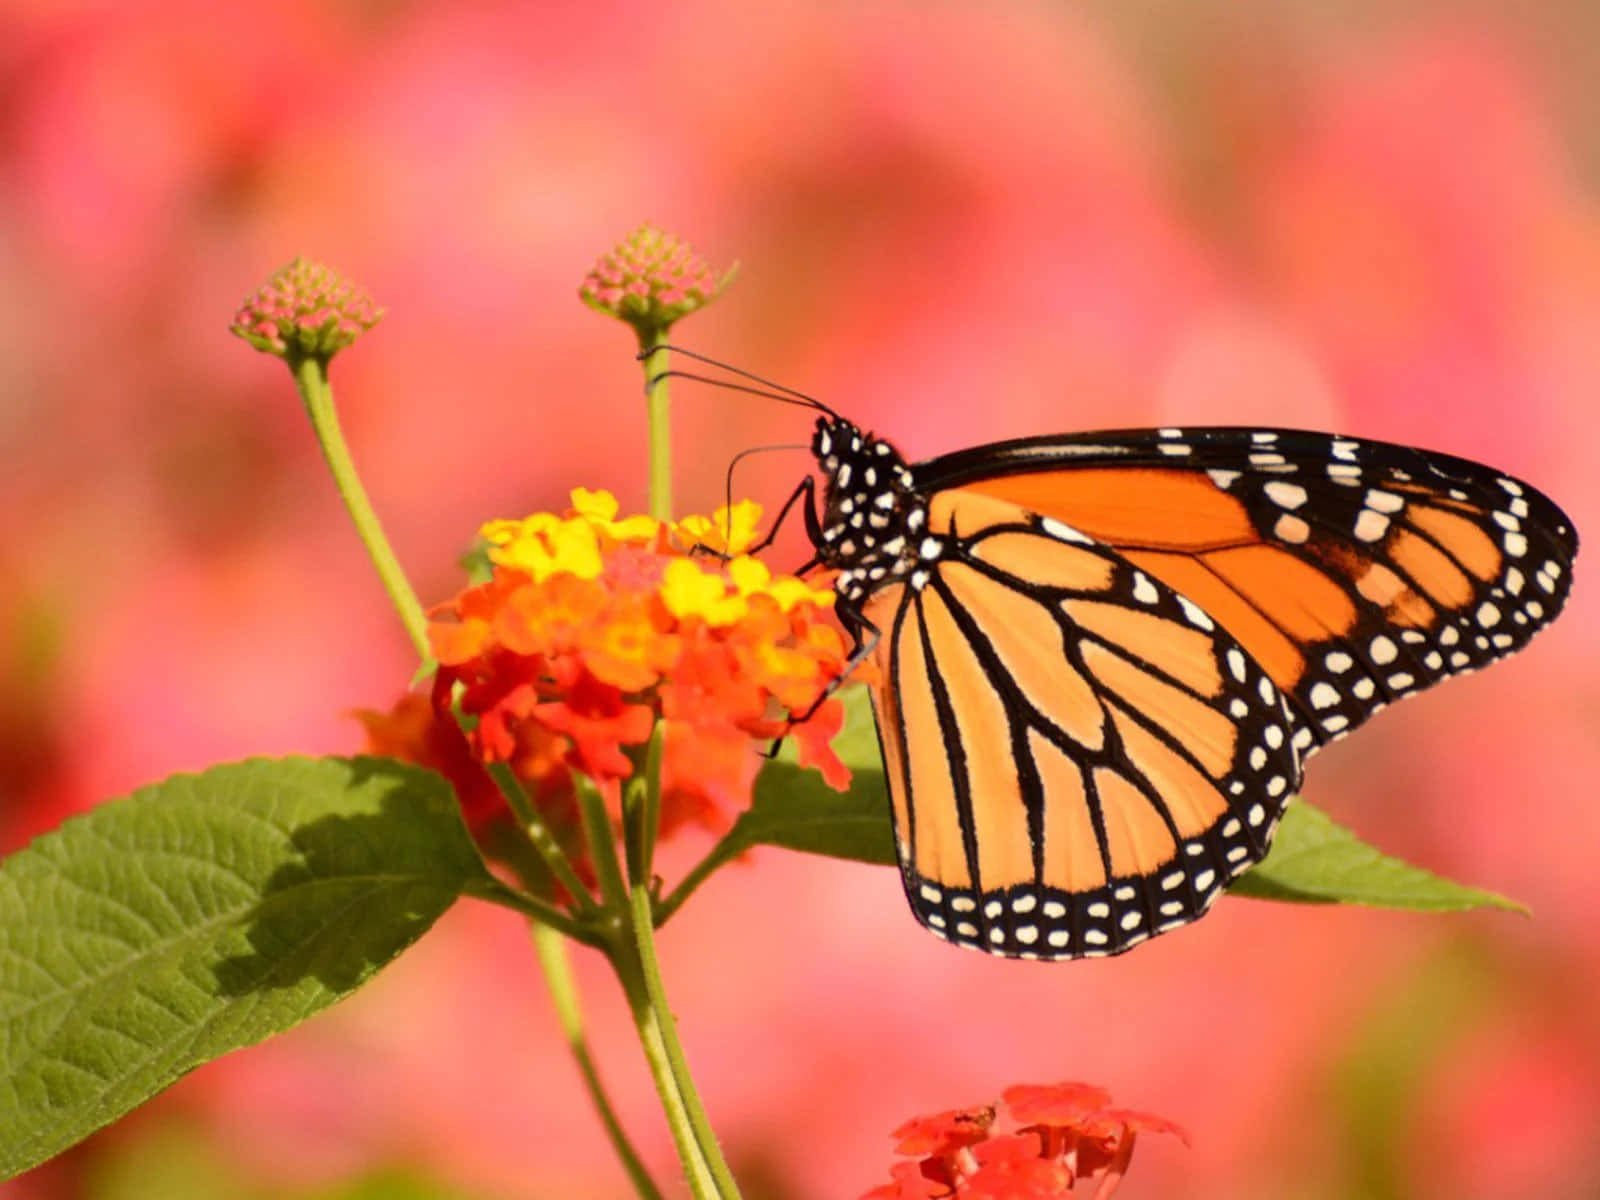 “A beautiful monarch butterfly extends its wings”